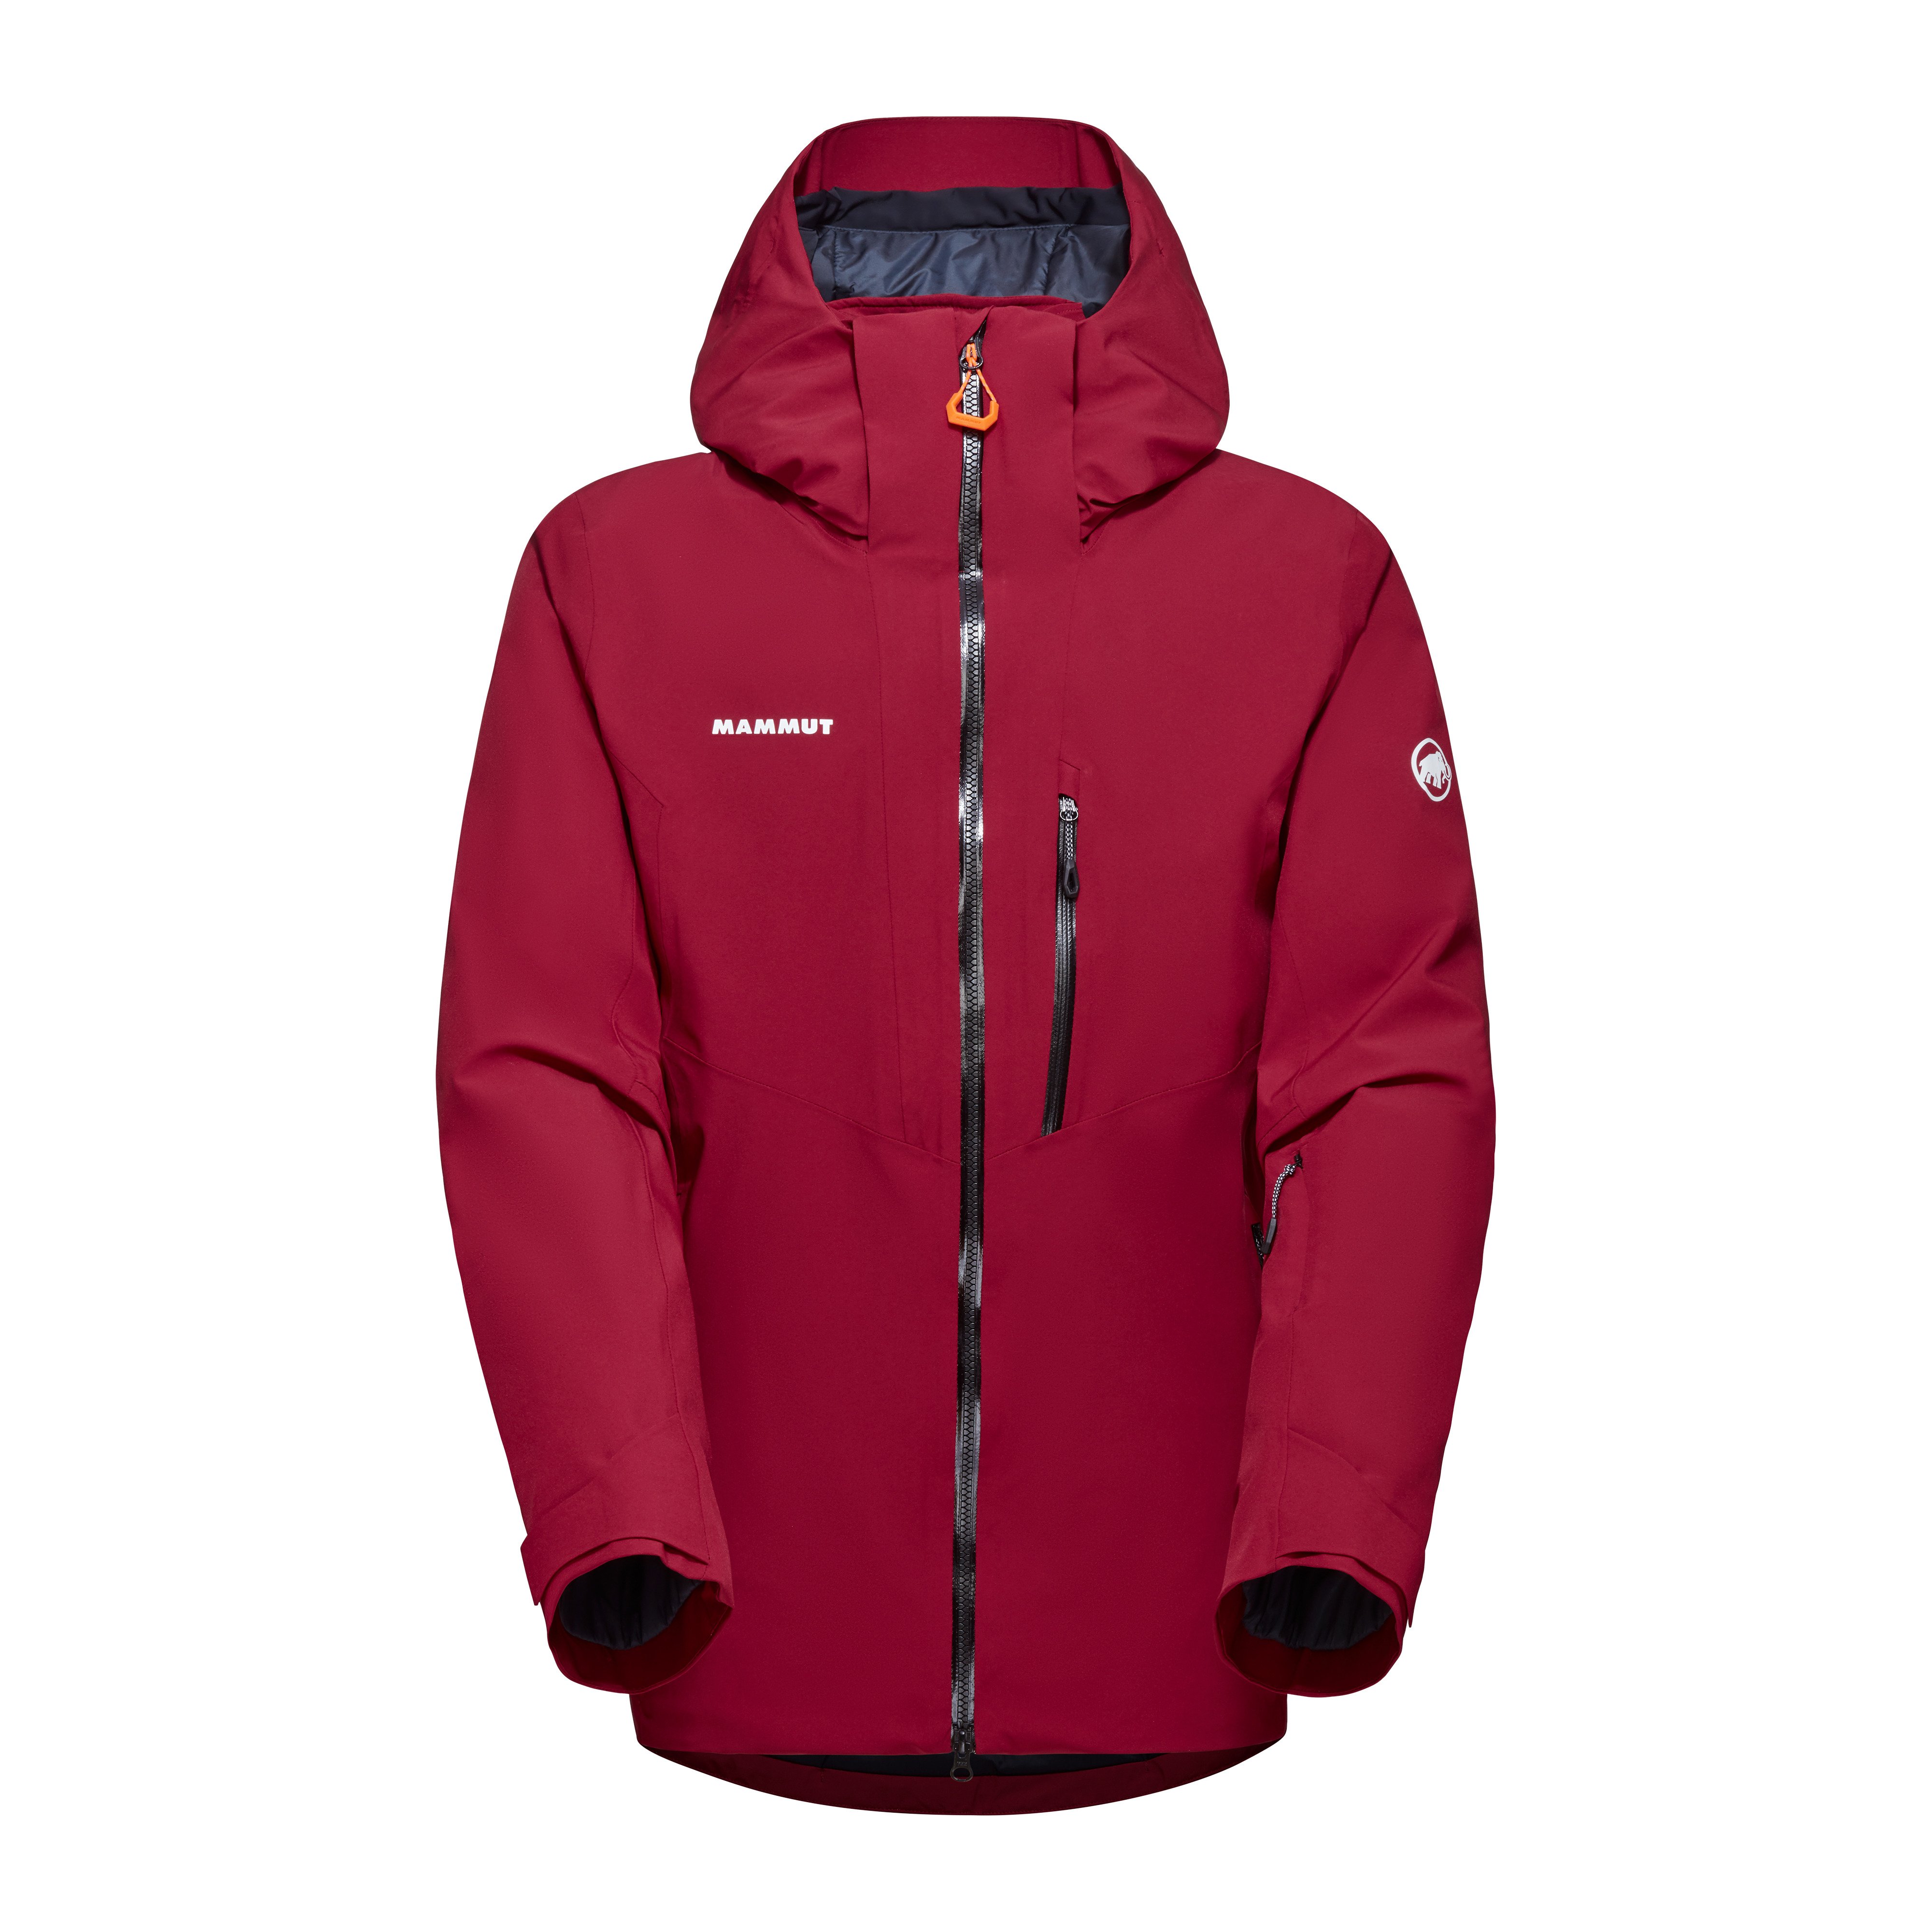 Stoney HS Thermo Jacket Men - blood red-black, L product image